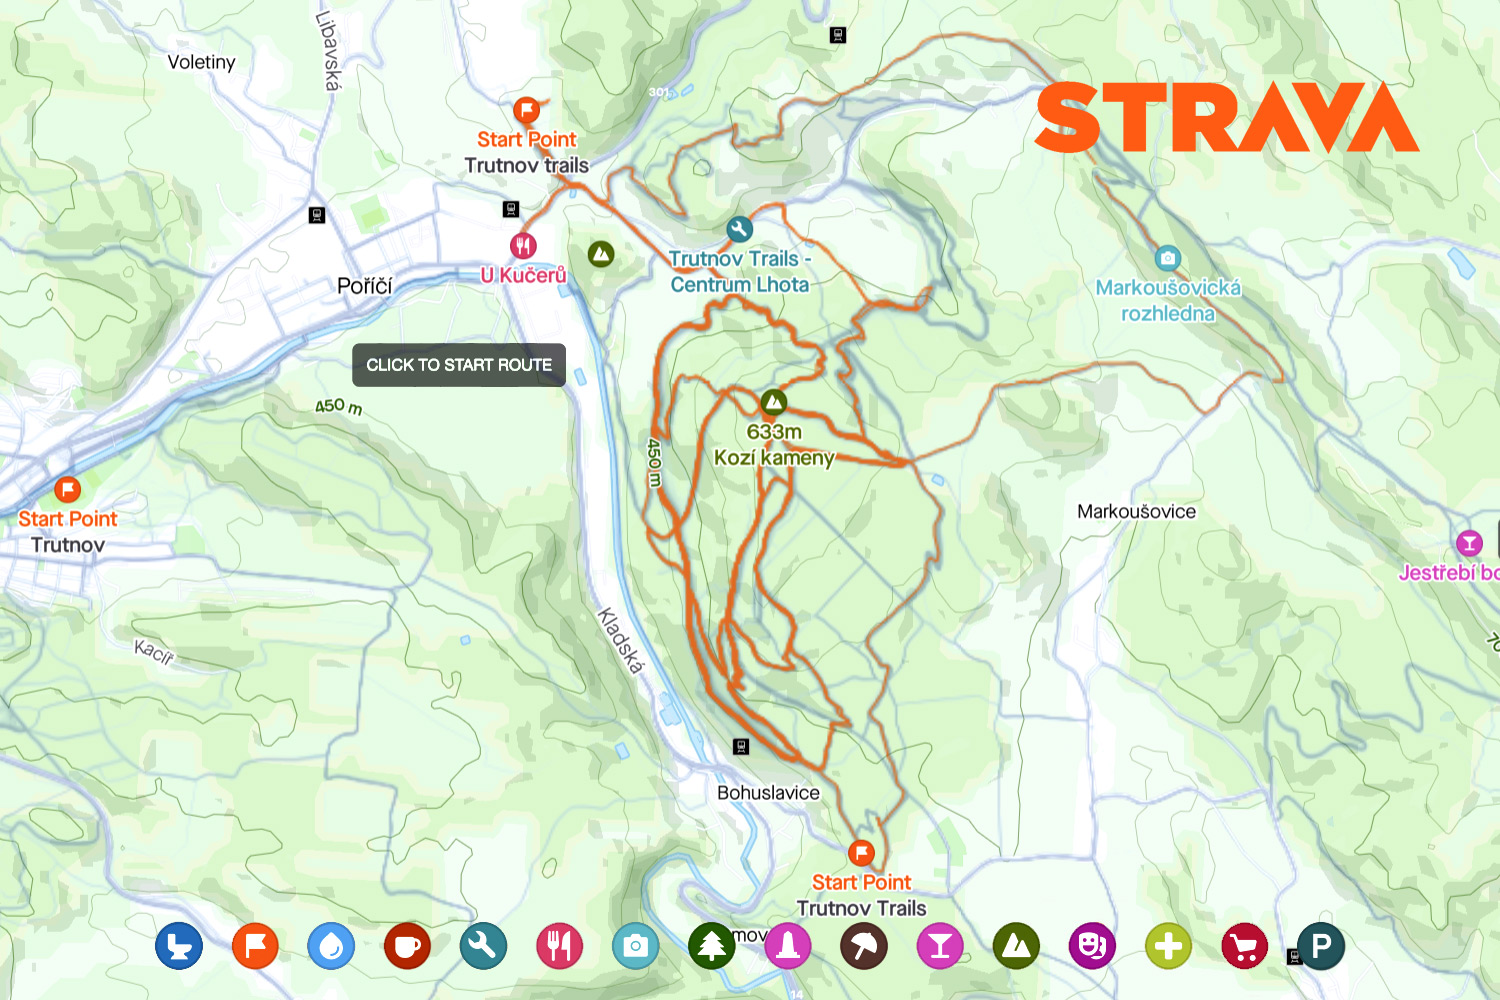 Strava Points of Interest suggestions, Planning routes with POIs